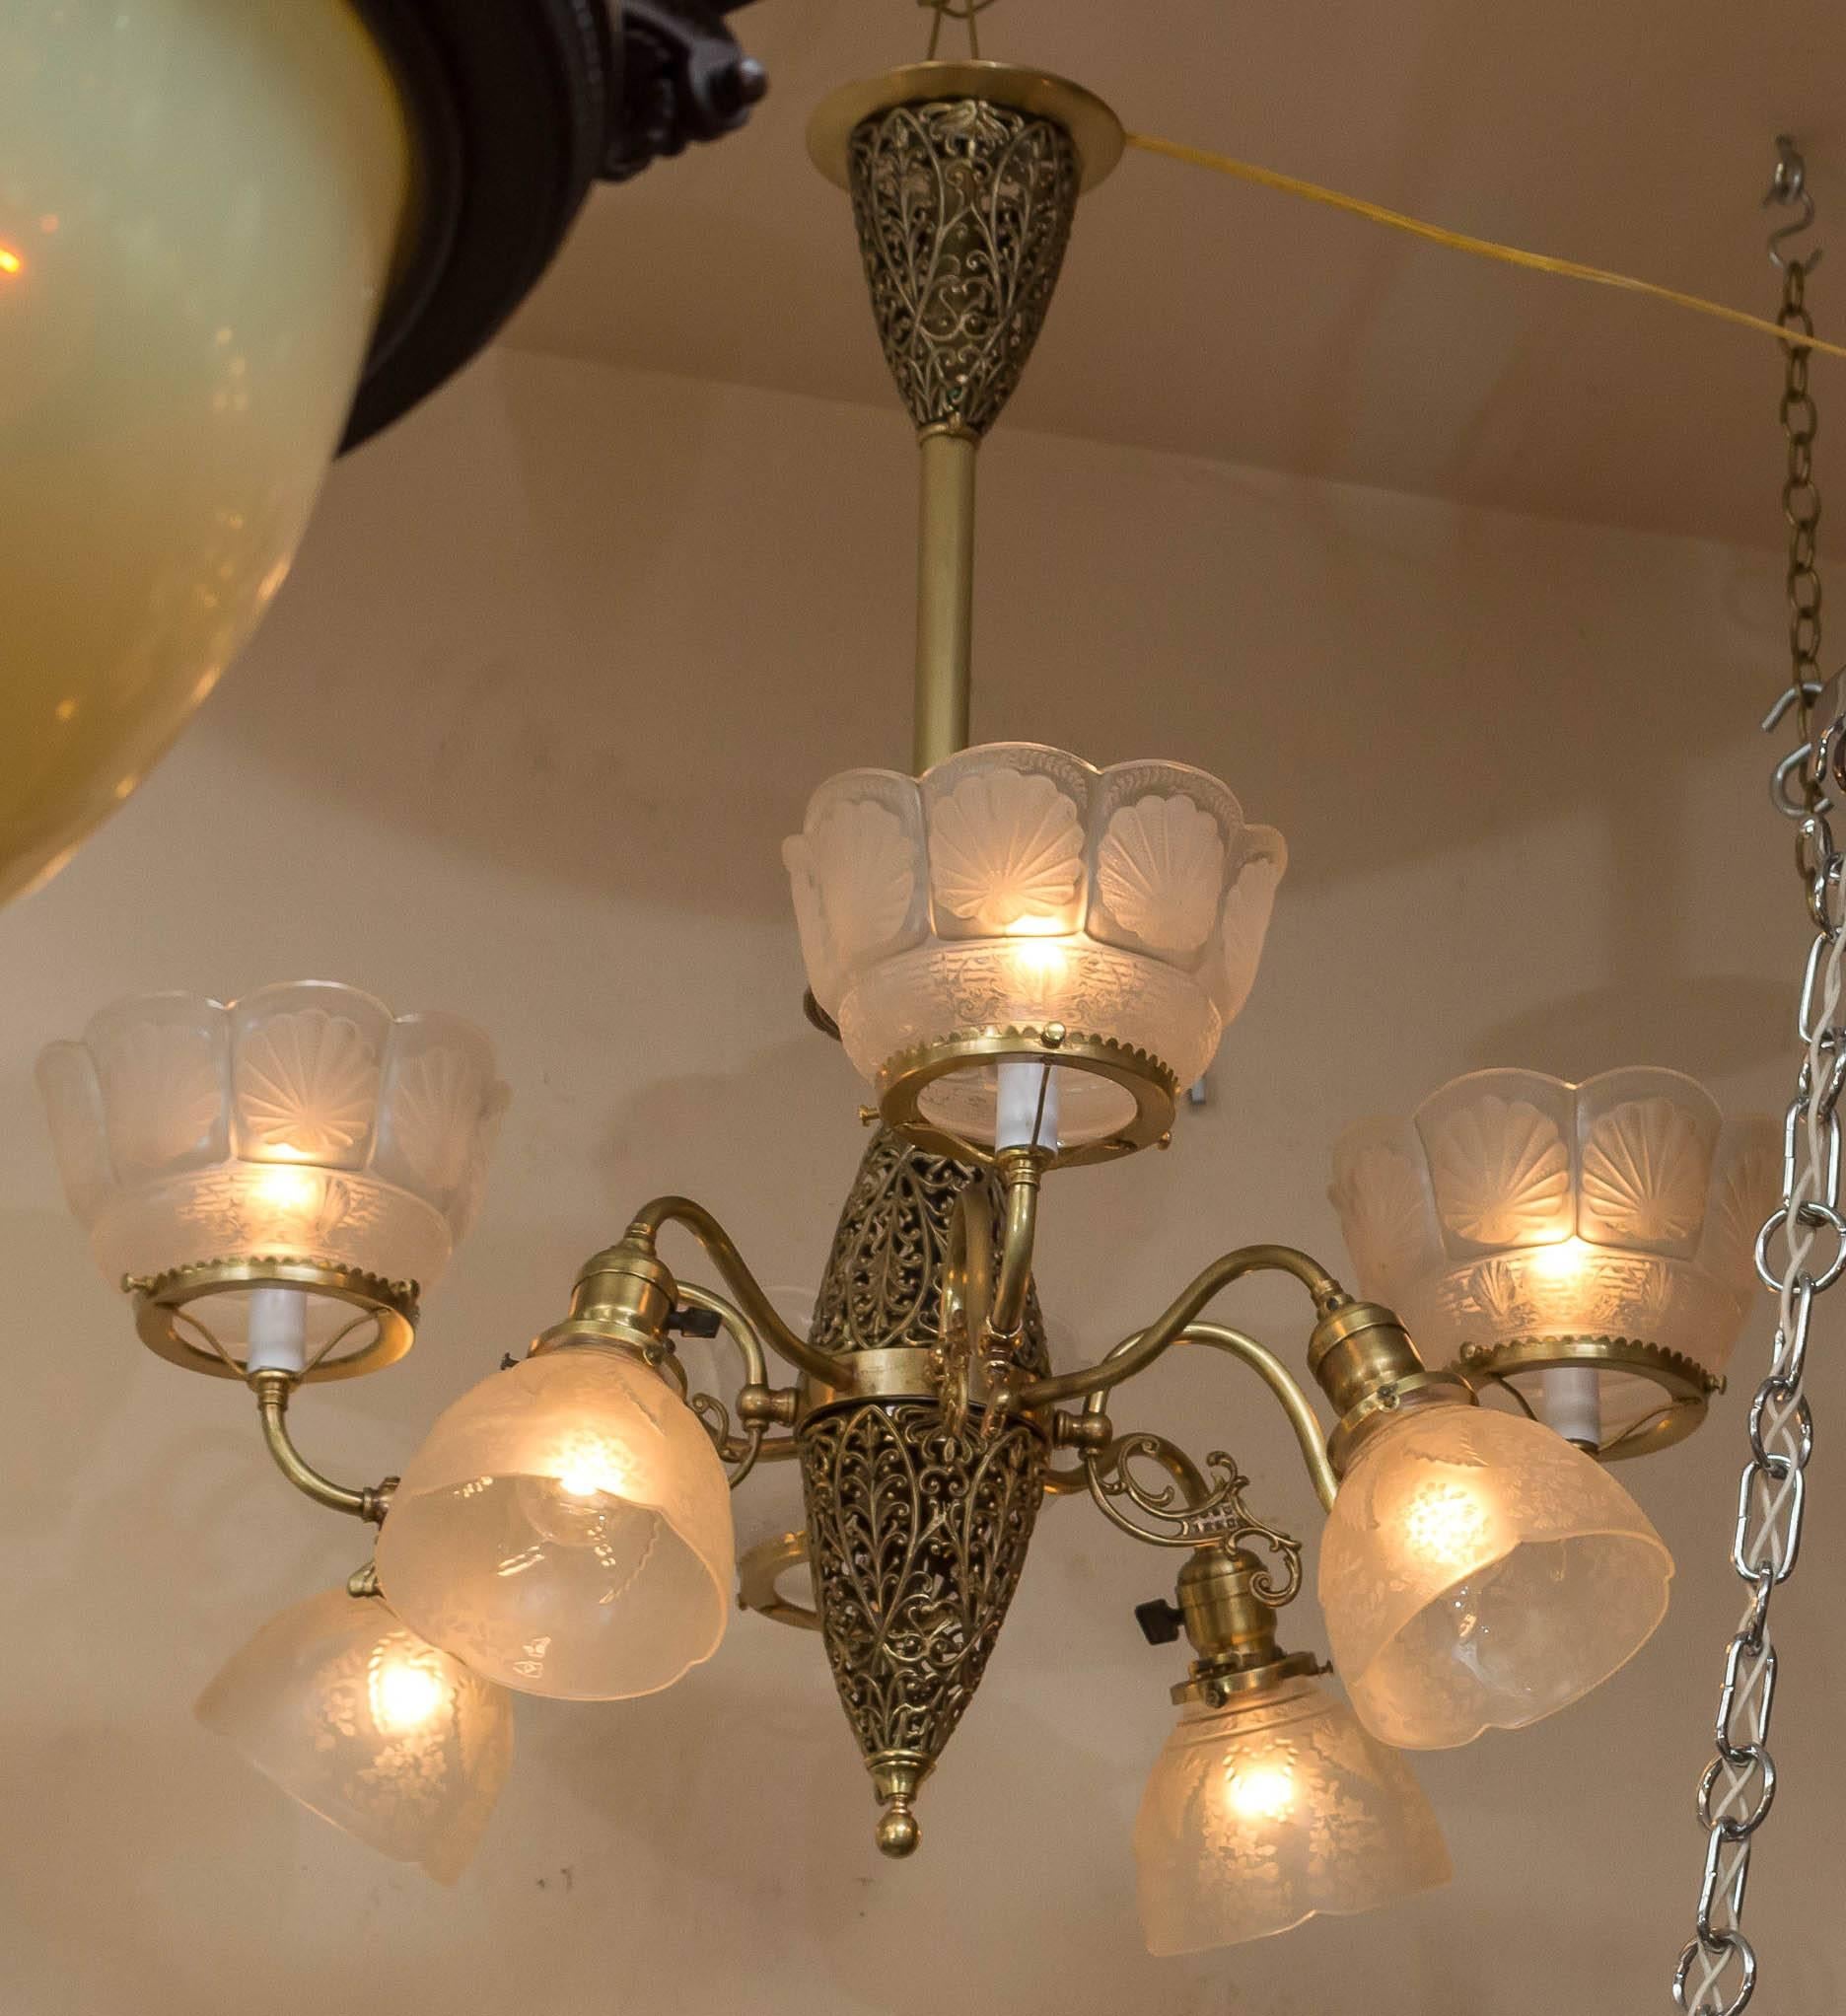 This late Victorian chandelier offers the desired pierced brass center as well as the beautiful deep etched period shades. The gas shades are particularly nice with a shell design. Chandeliers that offer up and down light are very popular and offer